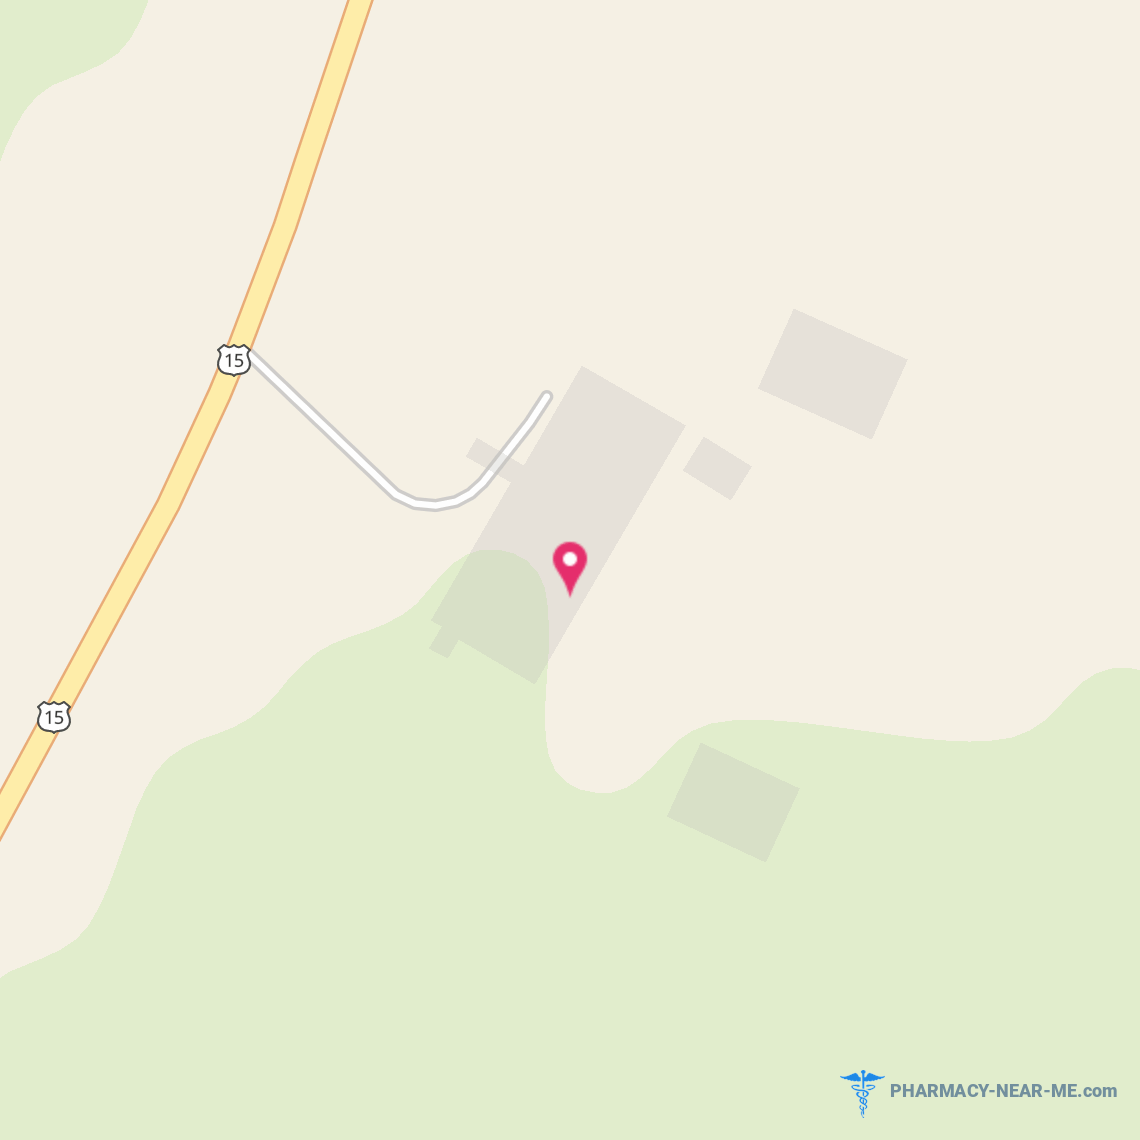 CENTRAL VIRGINIA HEALTH SERVICE INC - Pharmacy Hours, Phone, Reviews & Information: 25892 North James Madison Highway, New Canton, Virginia 23123, United States